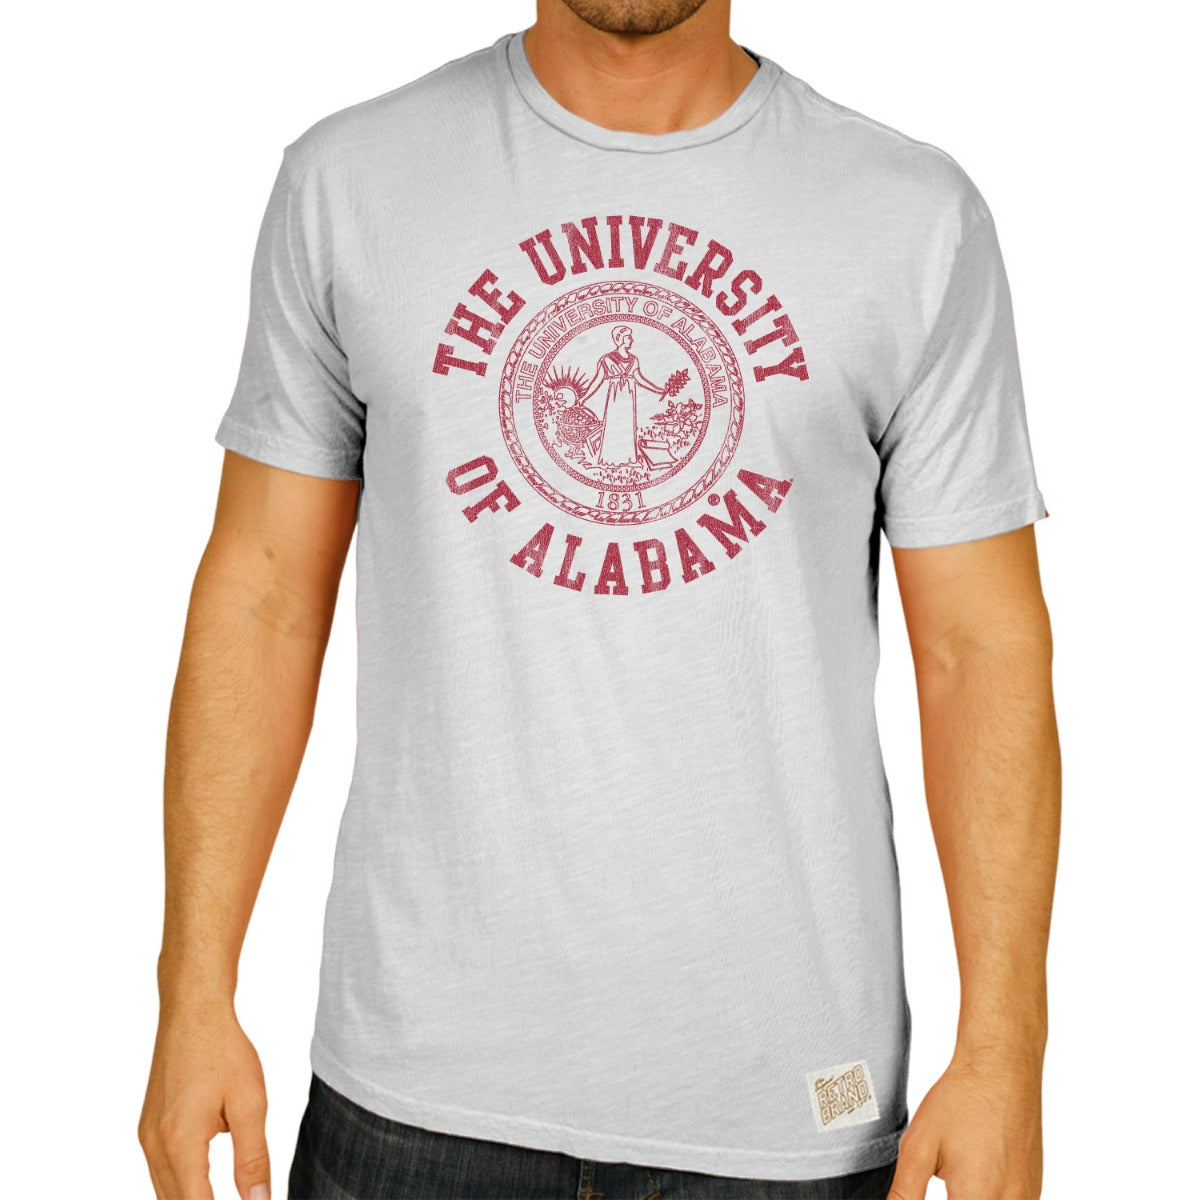 University of Alabama in red with seal in center on grey 100% cotton short sleeve tee